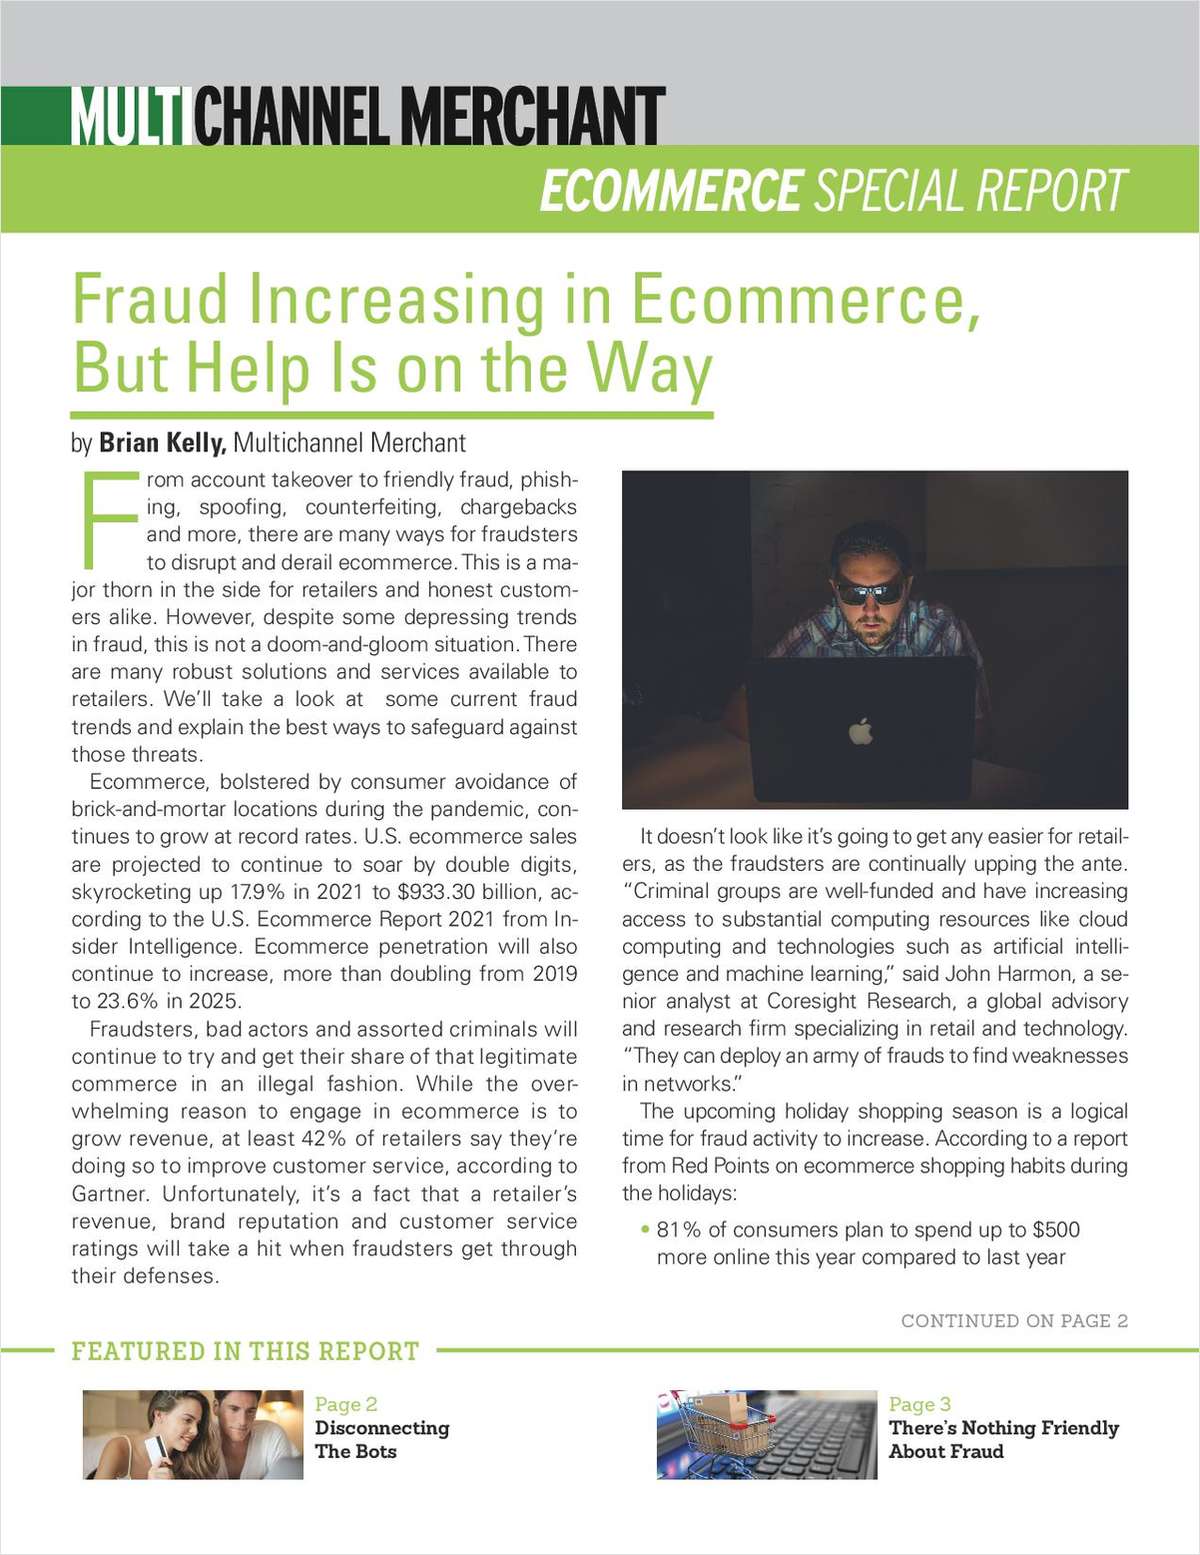 Ecommerce Fraud Increasing, But Help Is On the Way